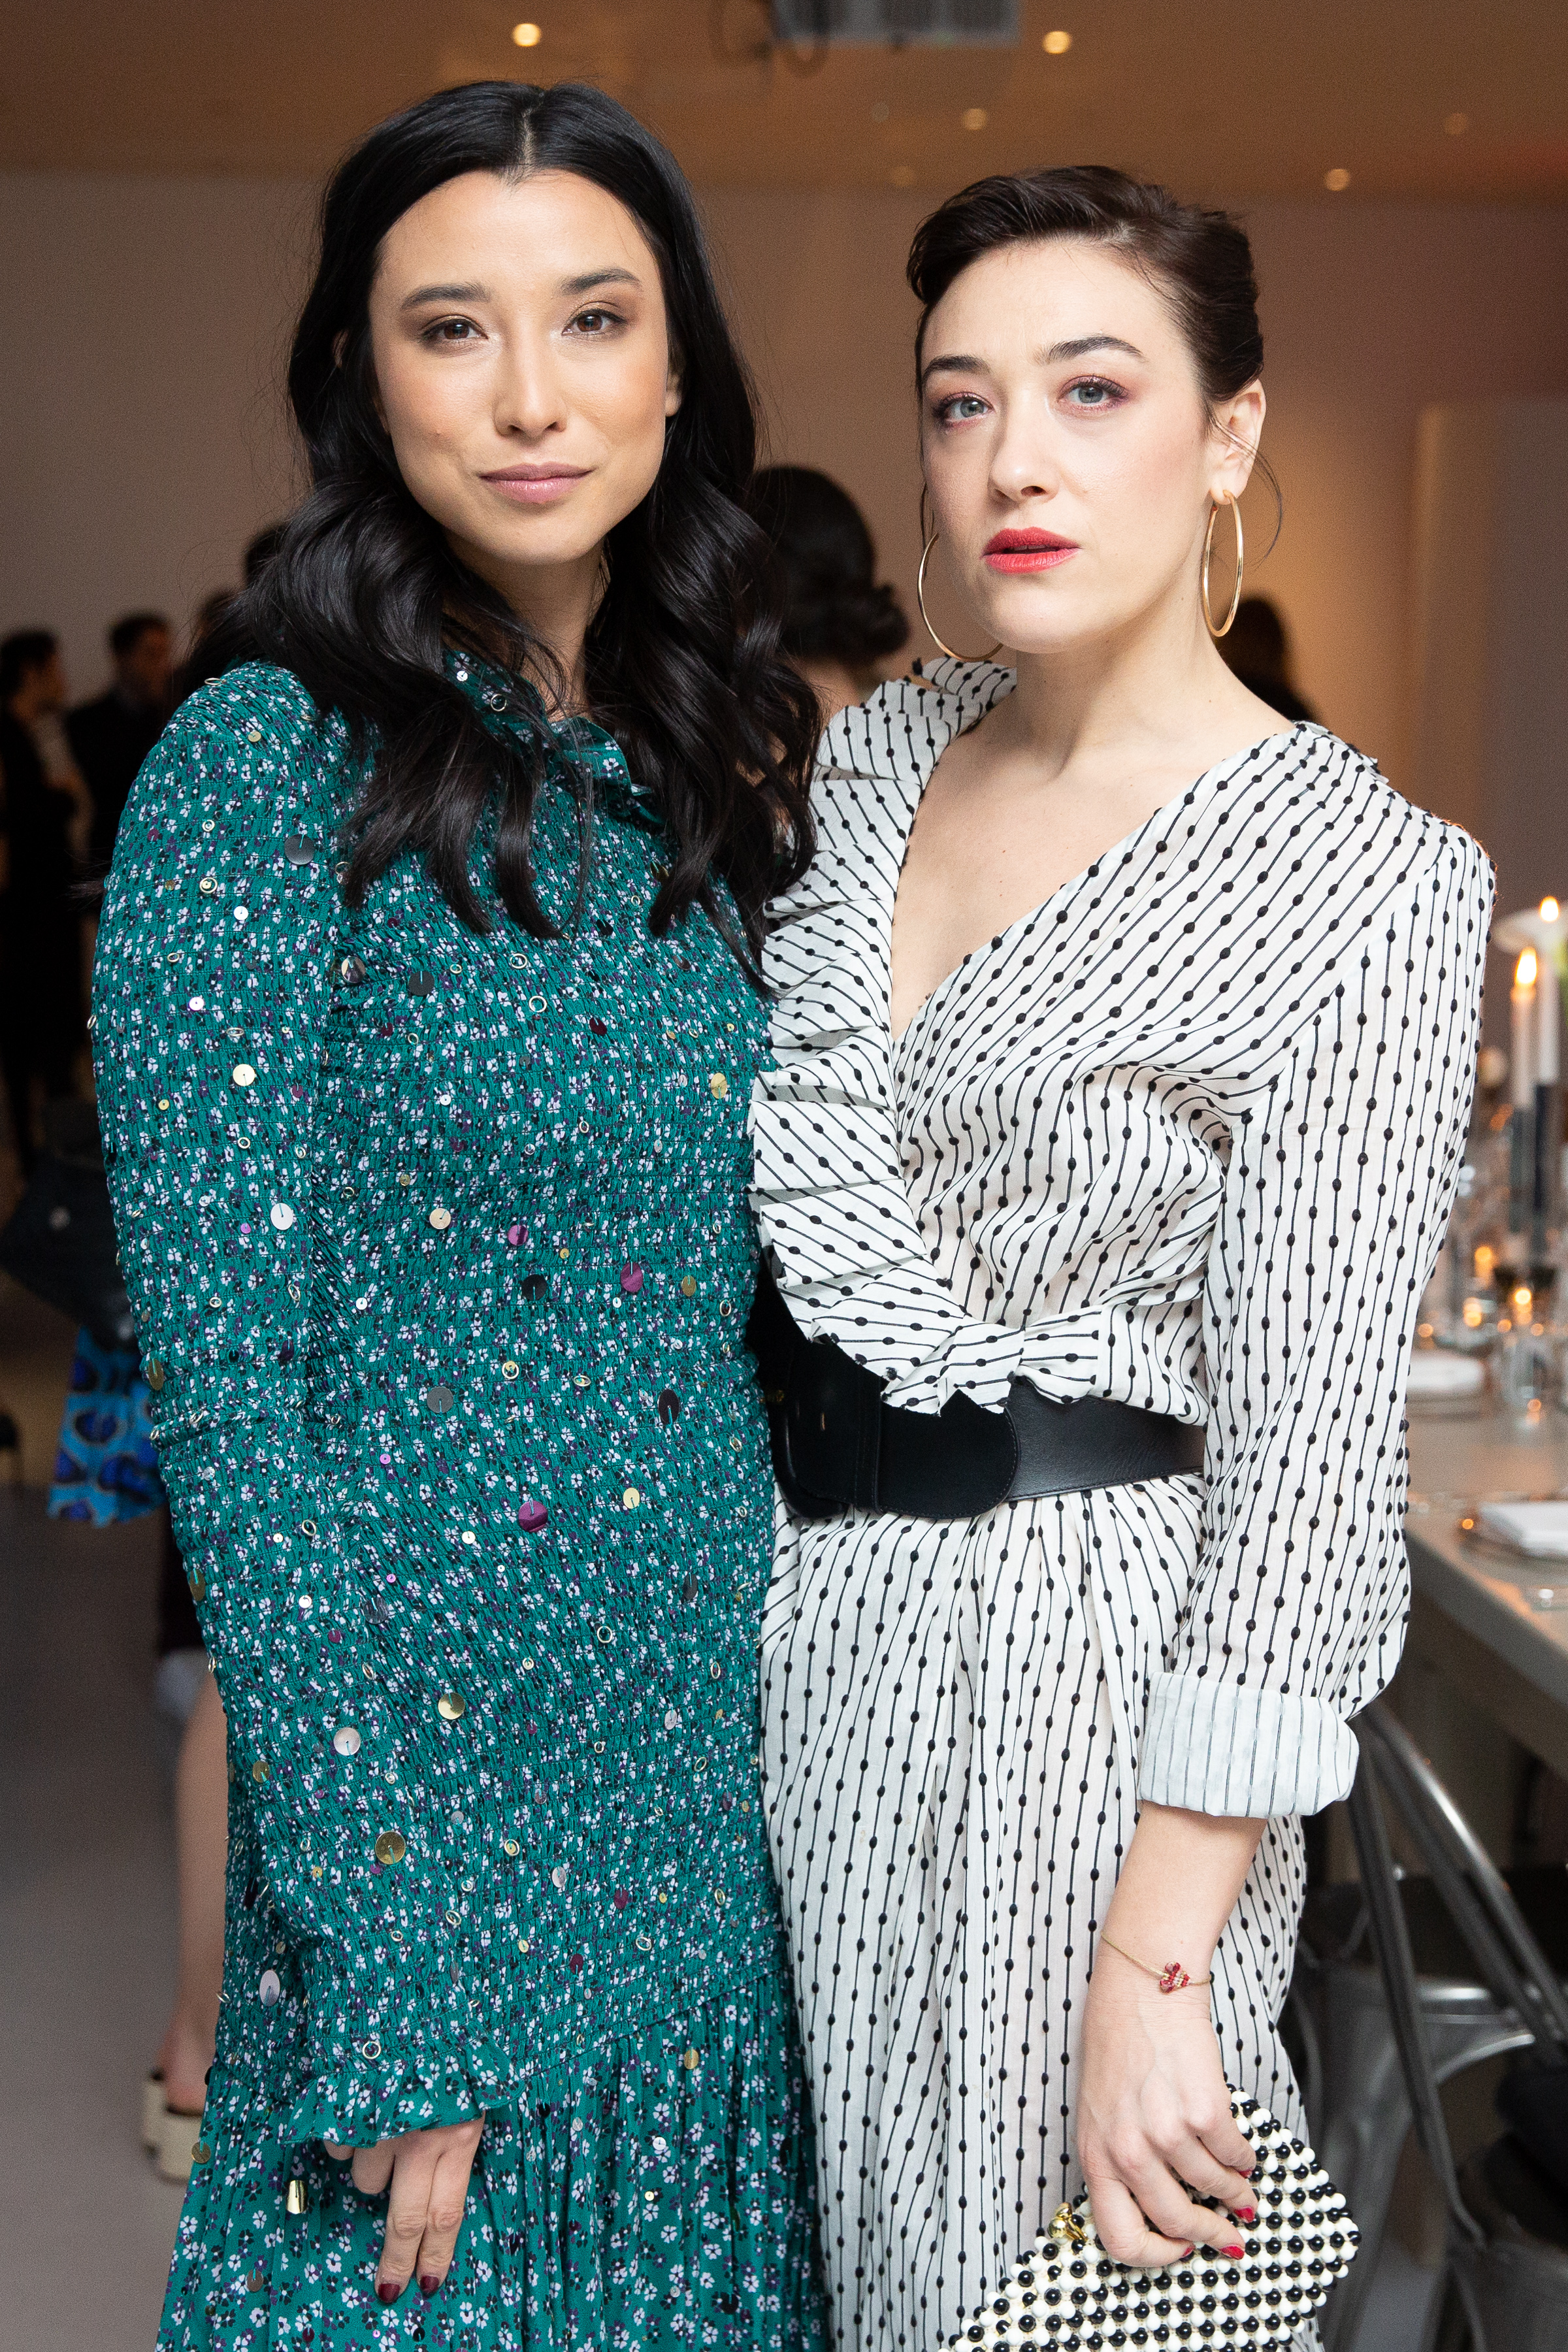 Lily Kwong and Mia Moretti. Photography by Kelly Taub/BFA.com.